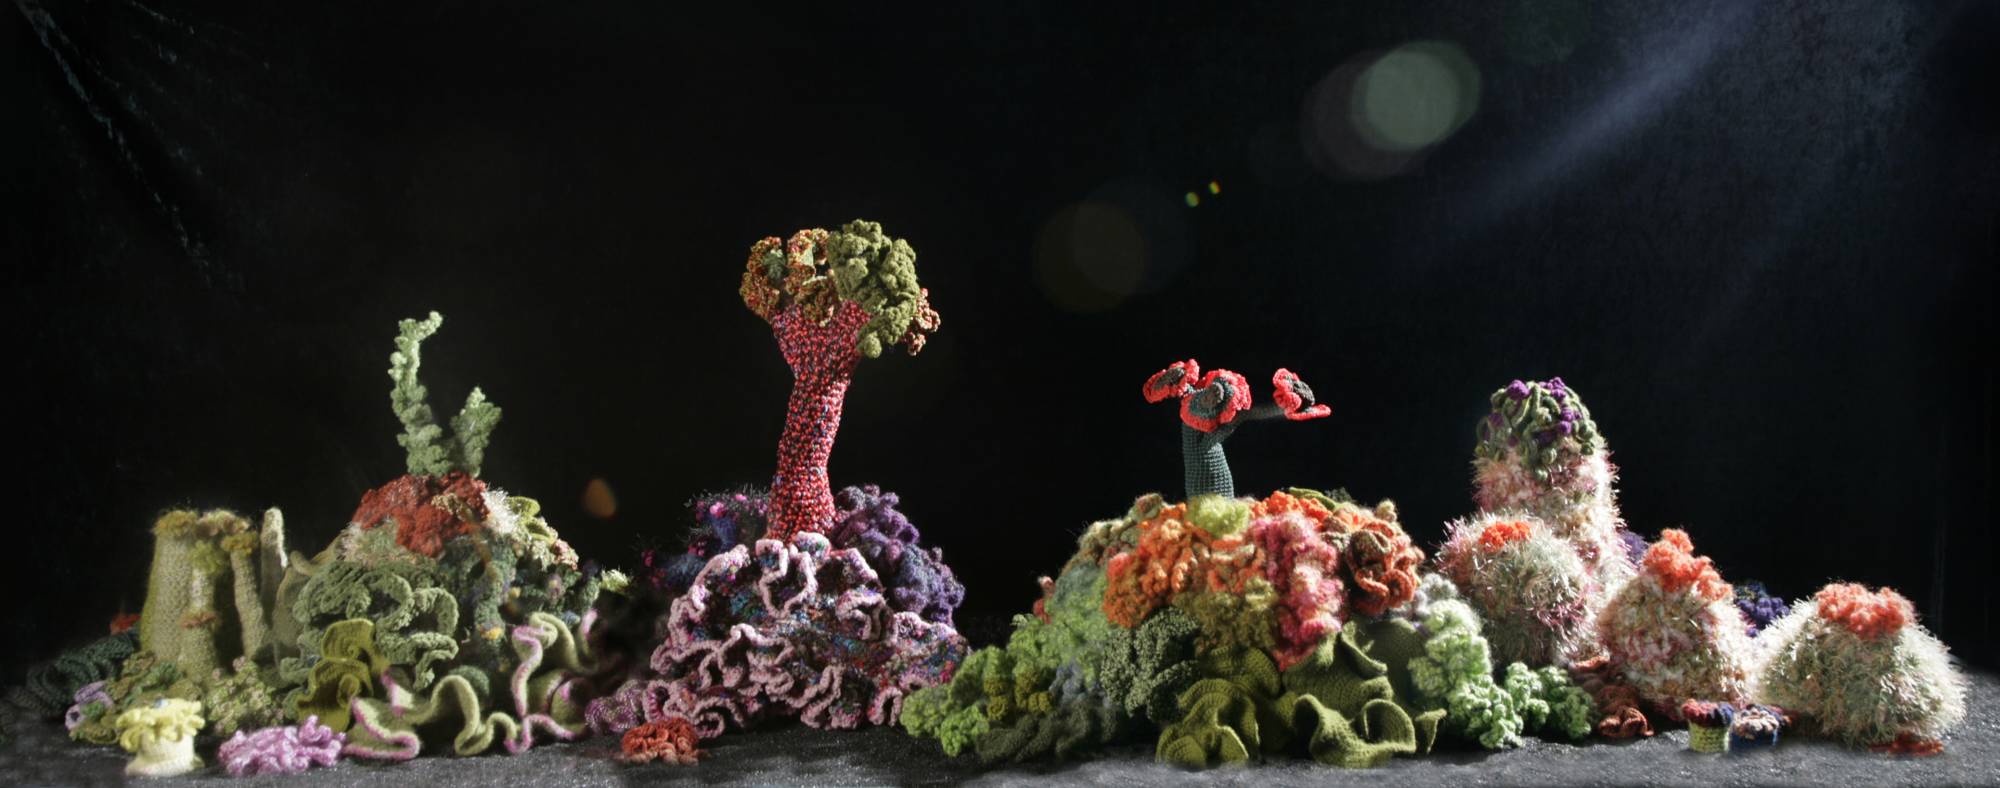 Coral sculpture landscape in greens and reds and purple